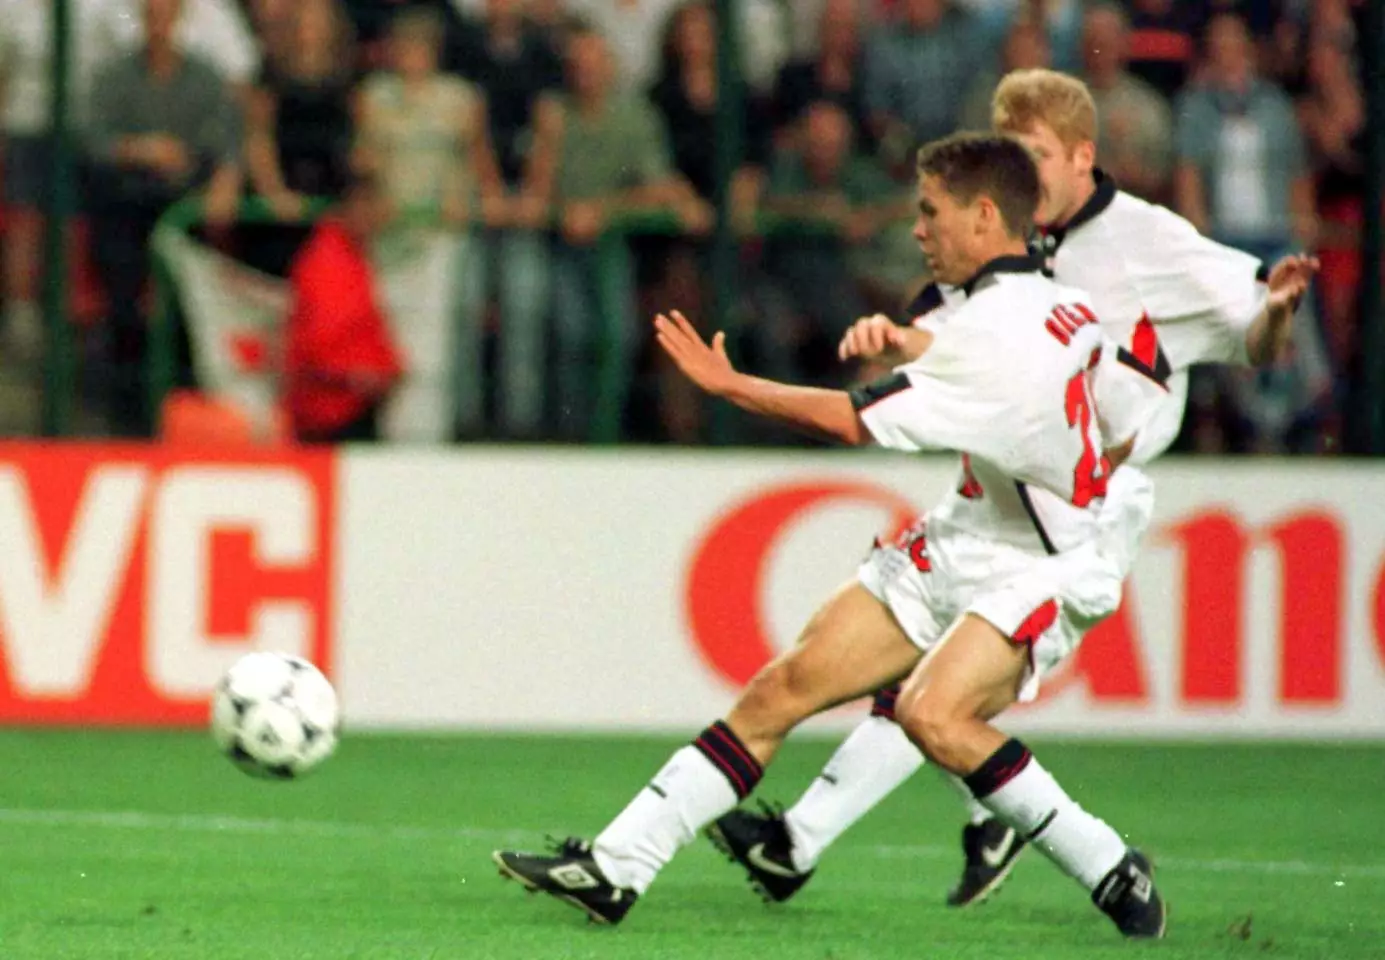 Michael Owen scoring in the 1998 World Cup. Image: PA Images